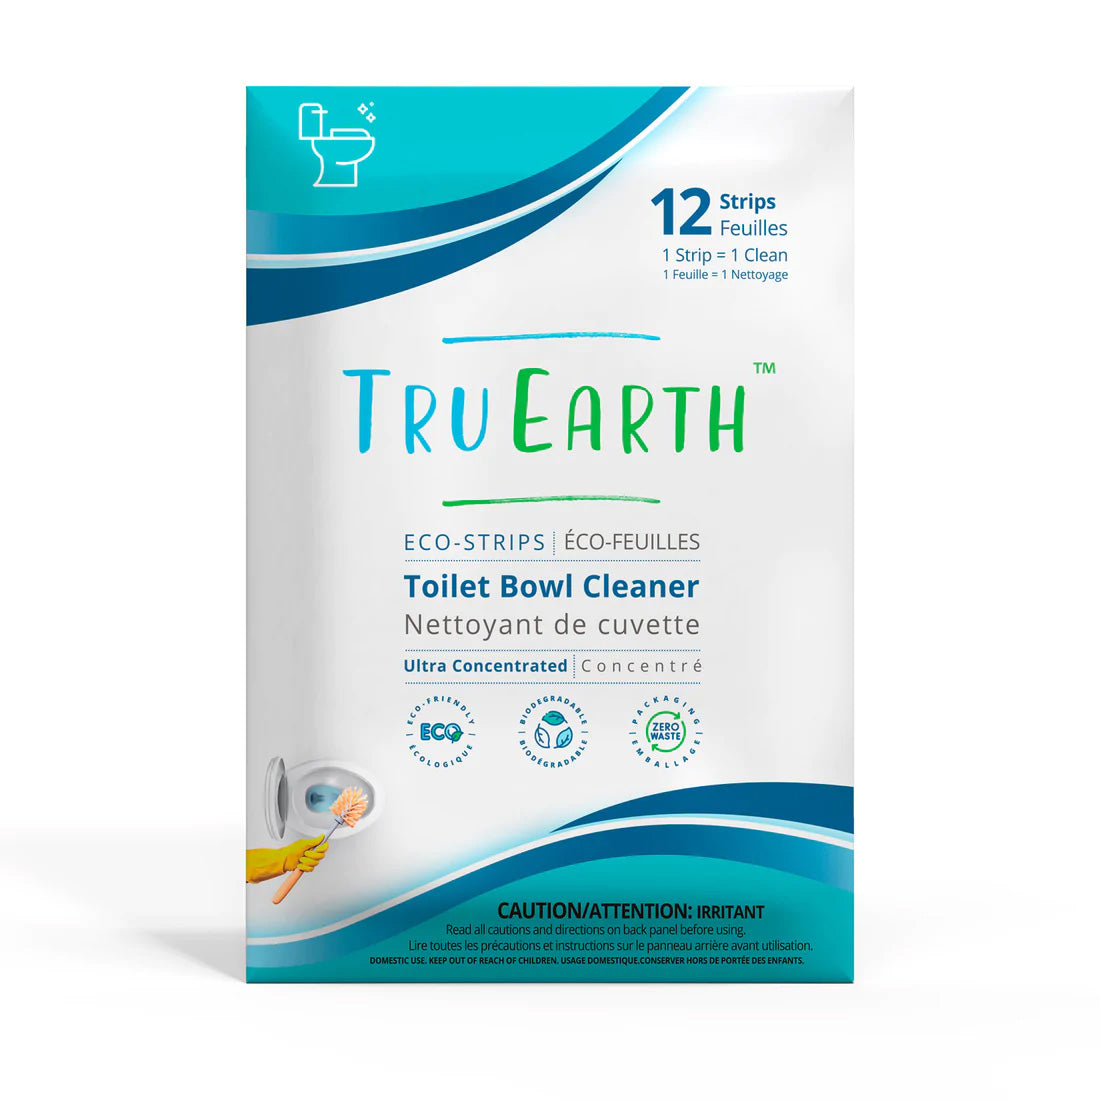 6 Top Benefits of Toilet Strips: Clean Your Toilet the Eco-Friendly Way